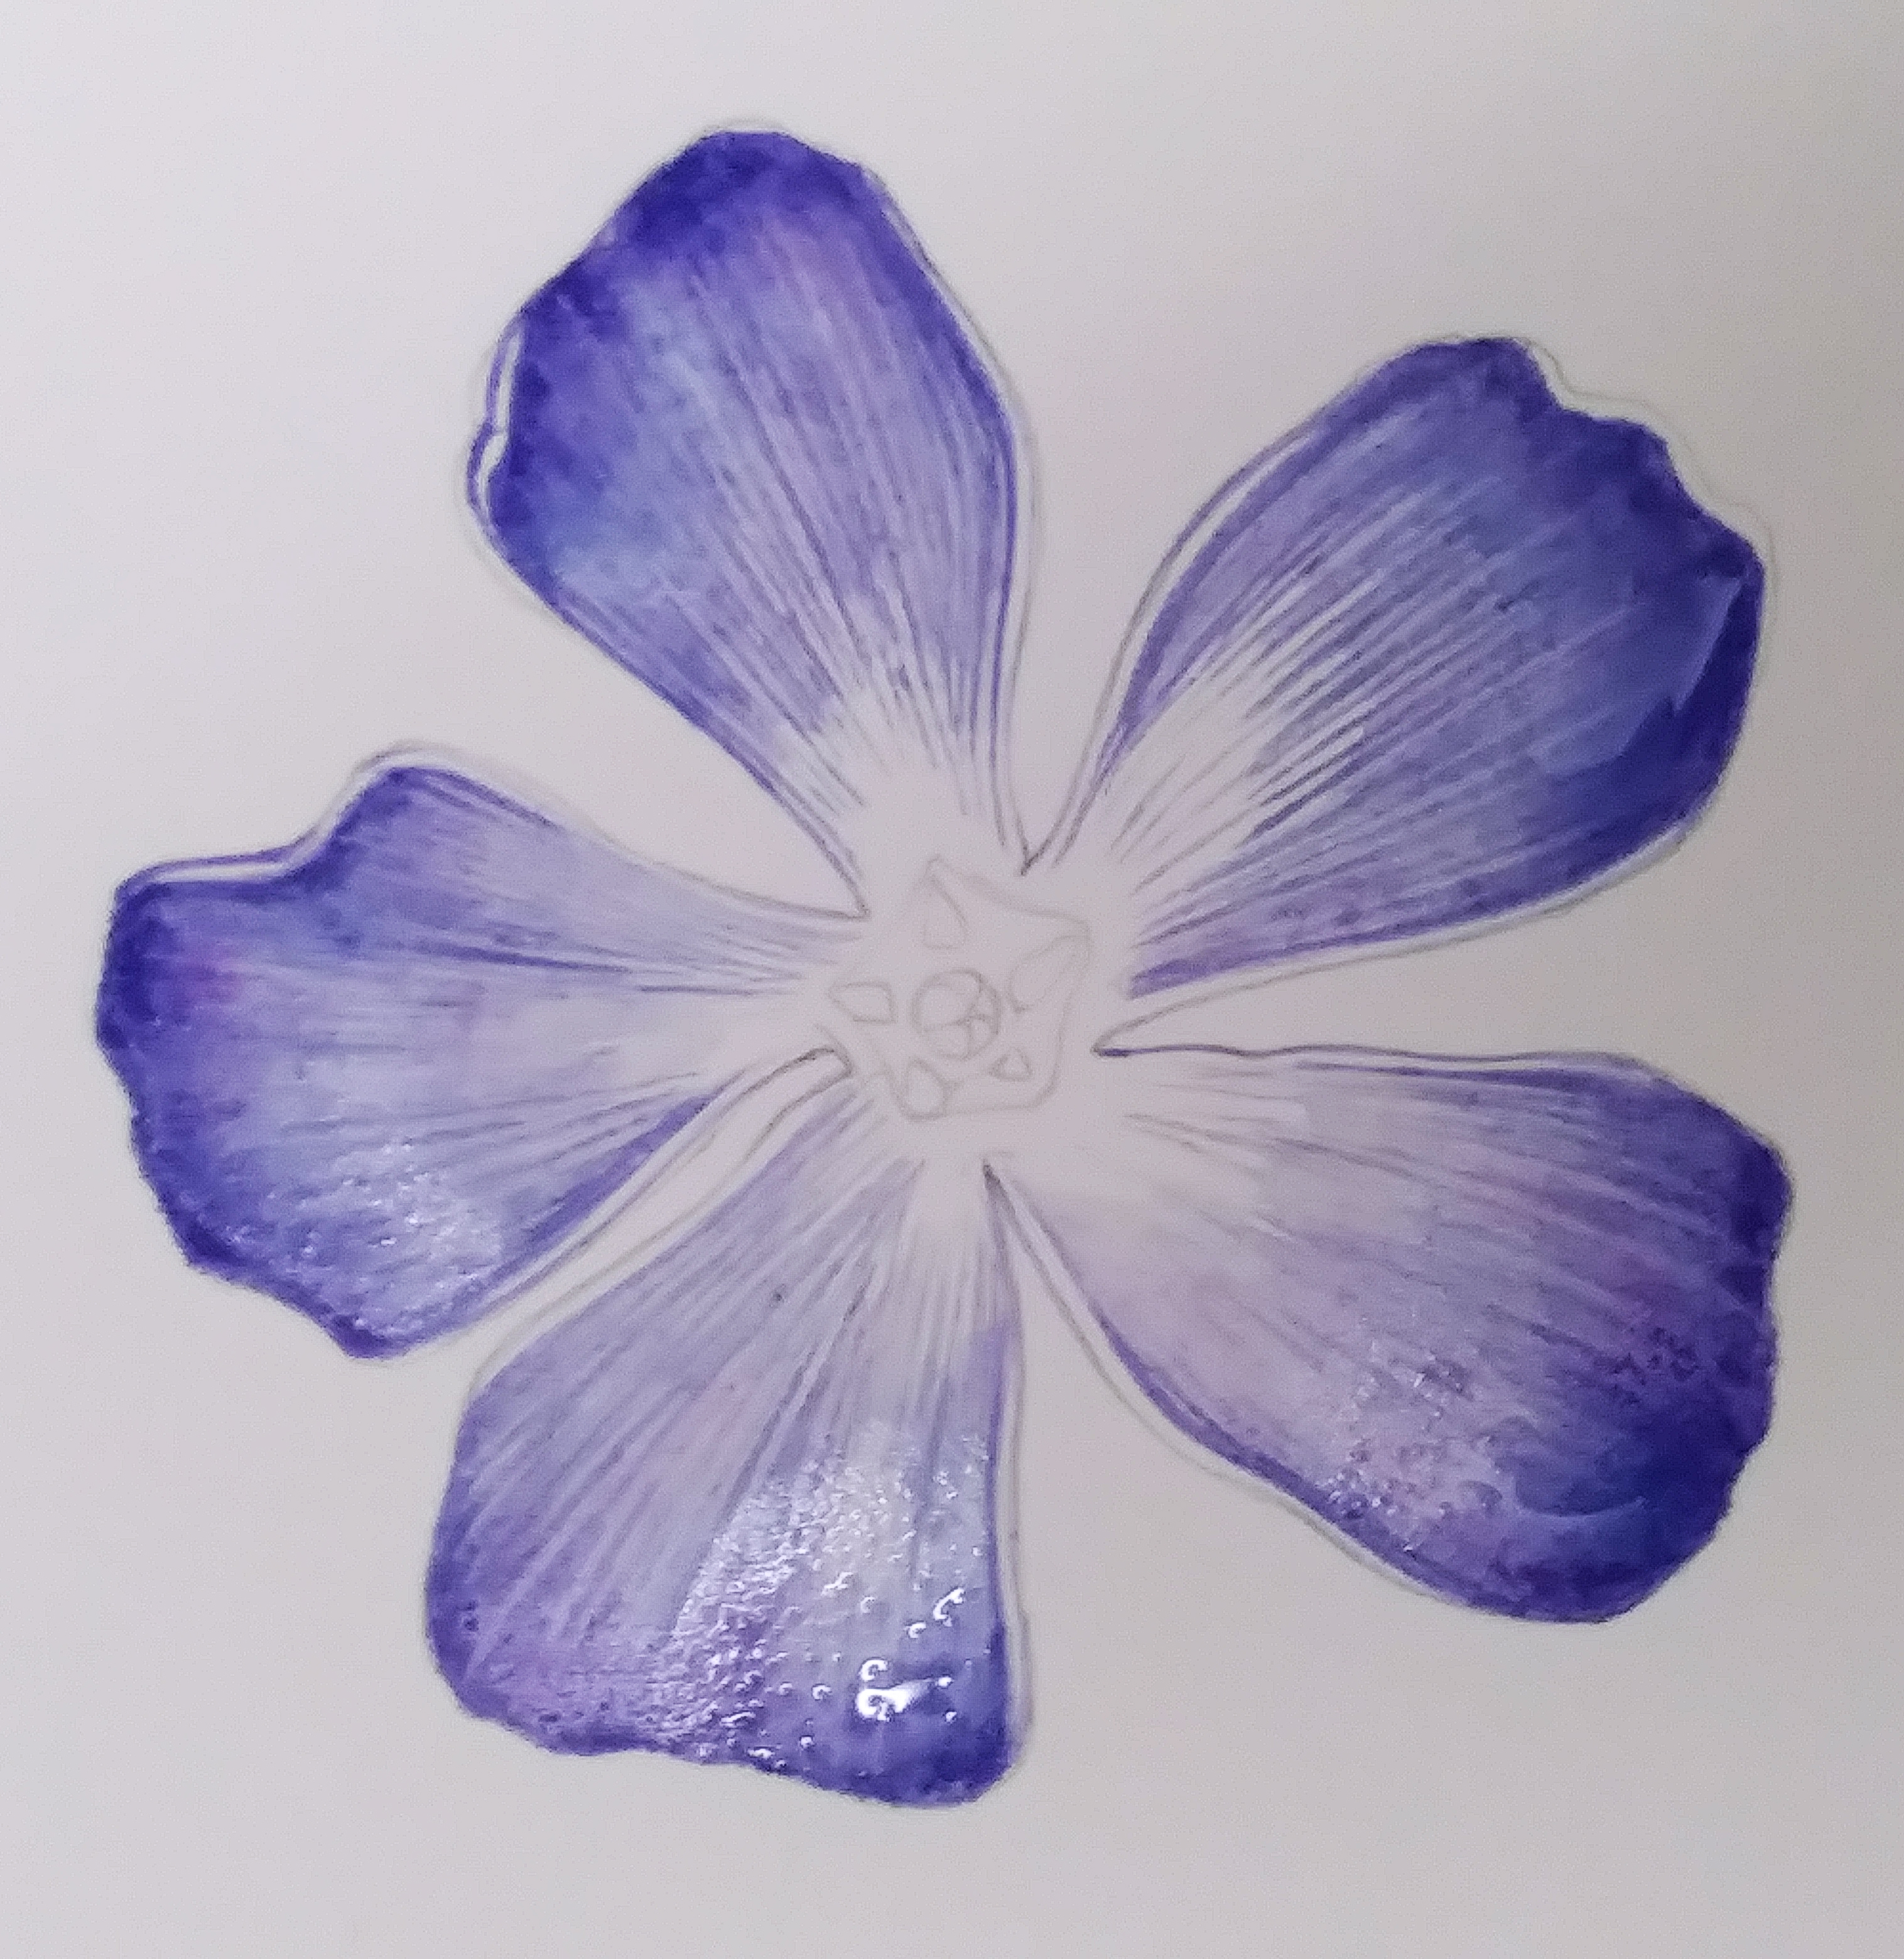 5 Step by step Periwinkle botanical illustration by Lizzie Harper